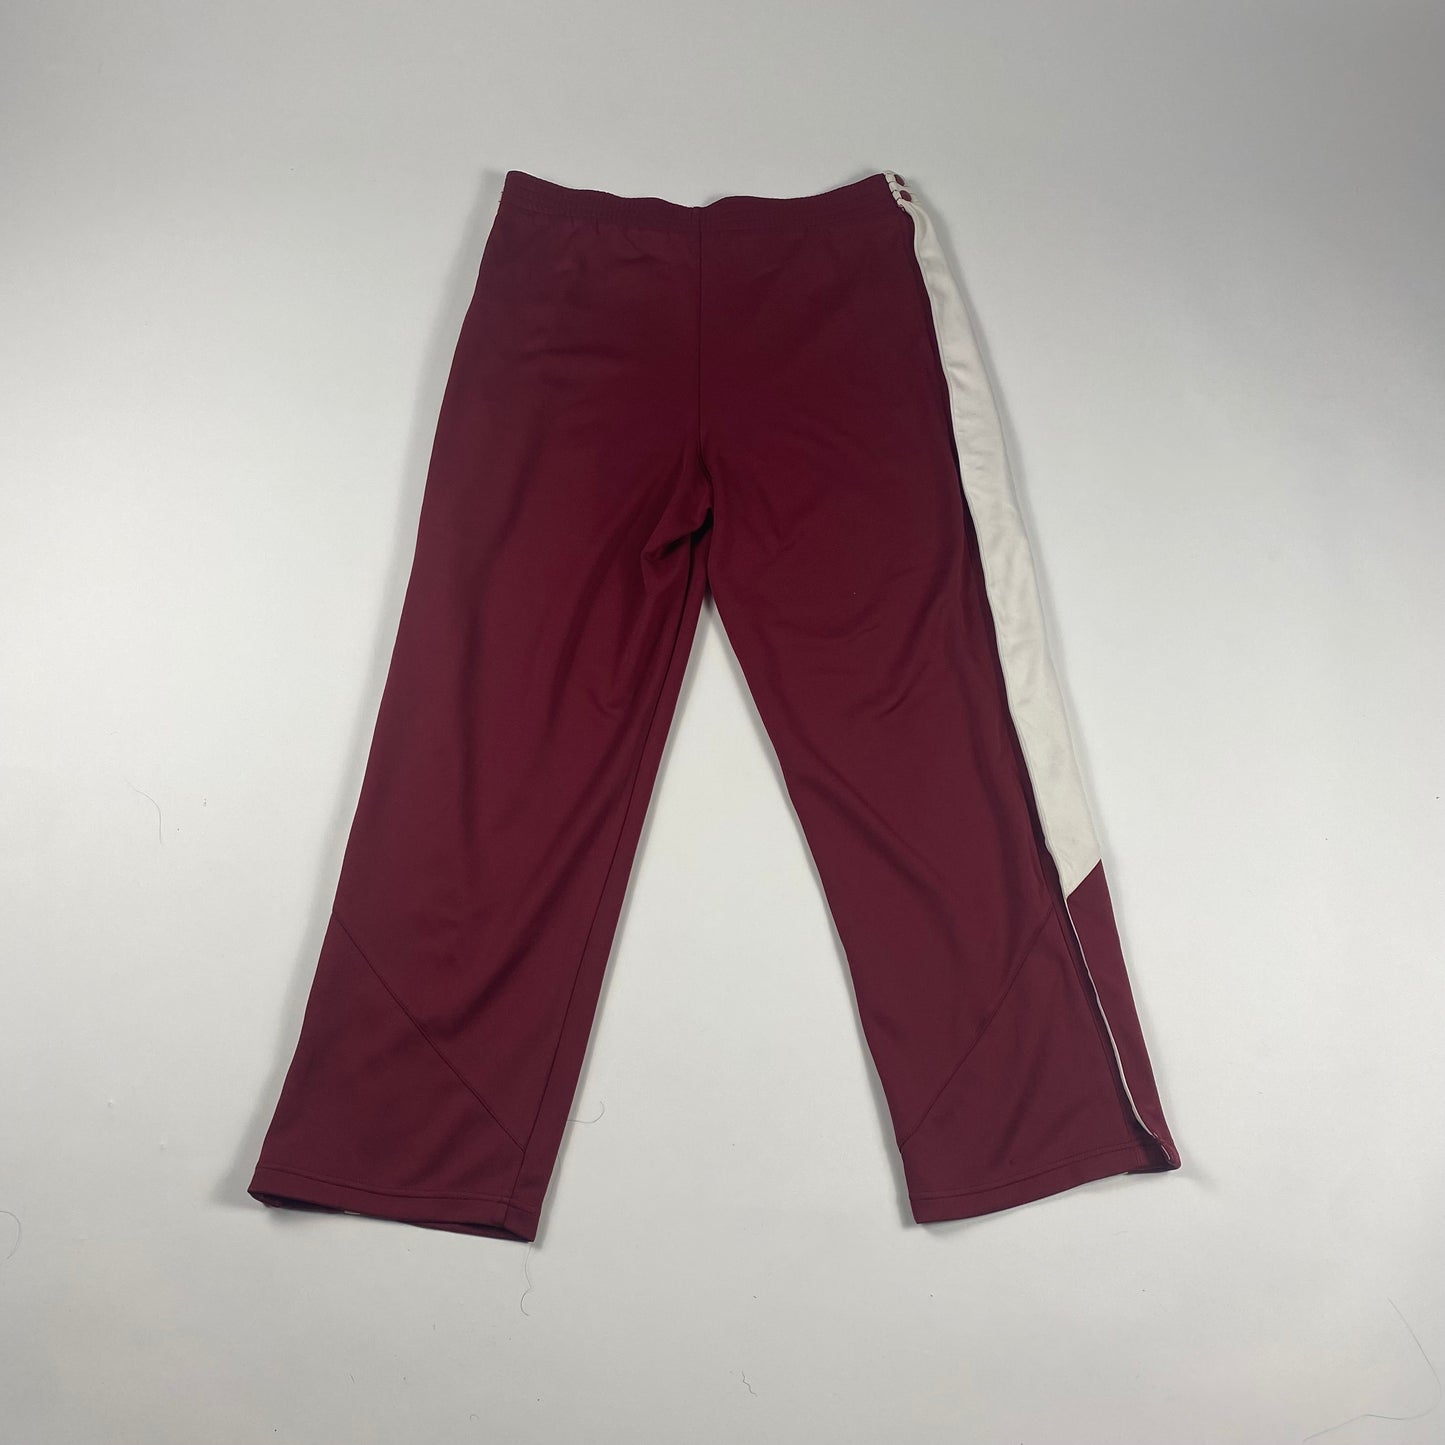 Team Issued Florida State Nike Warm Up Pants (L)